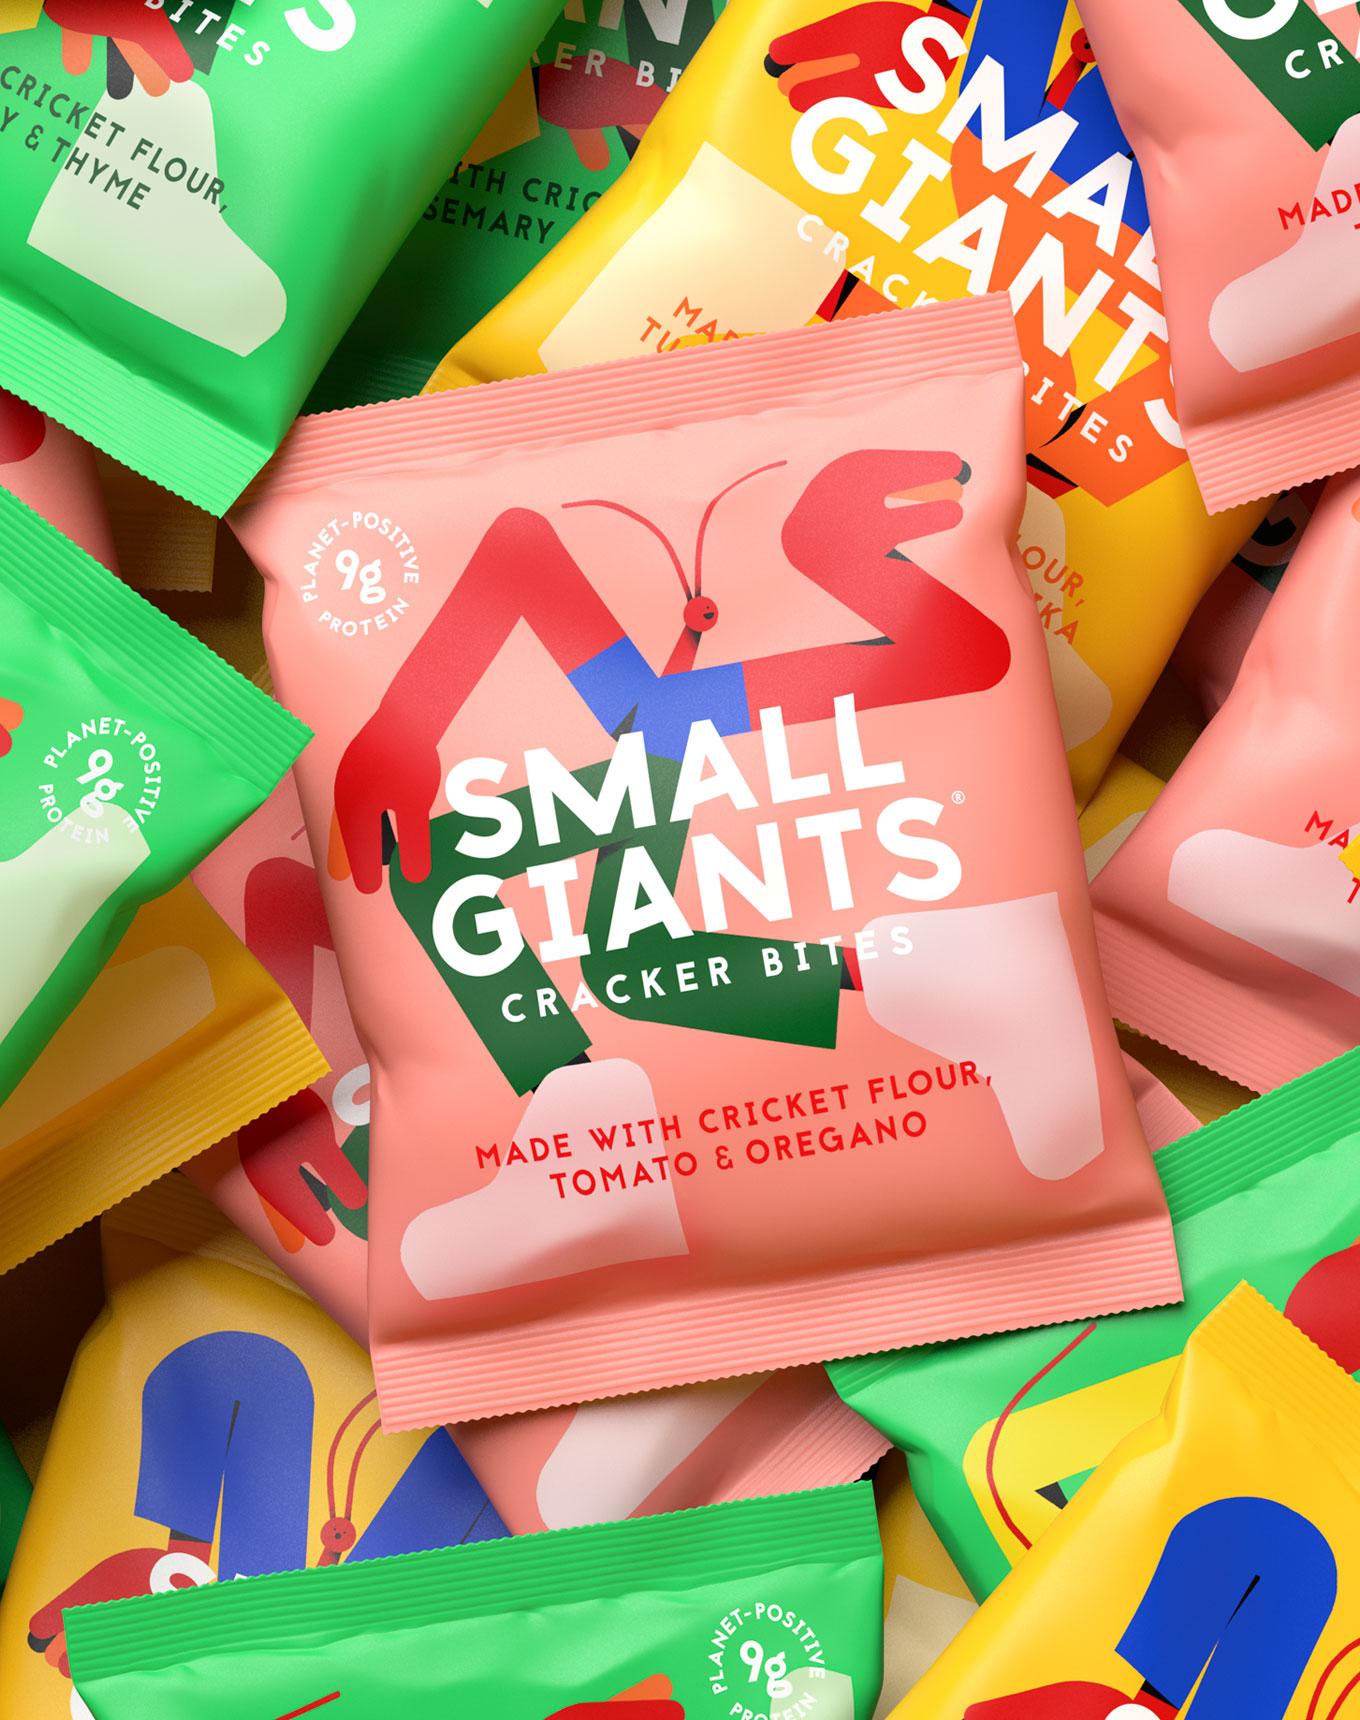 Small Giants Packaging Design